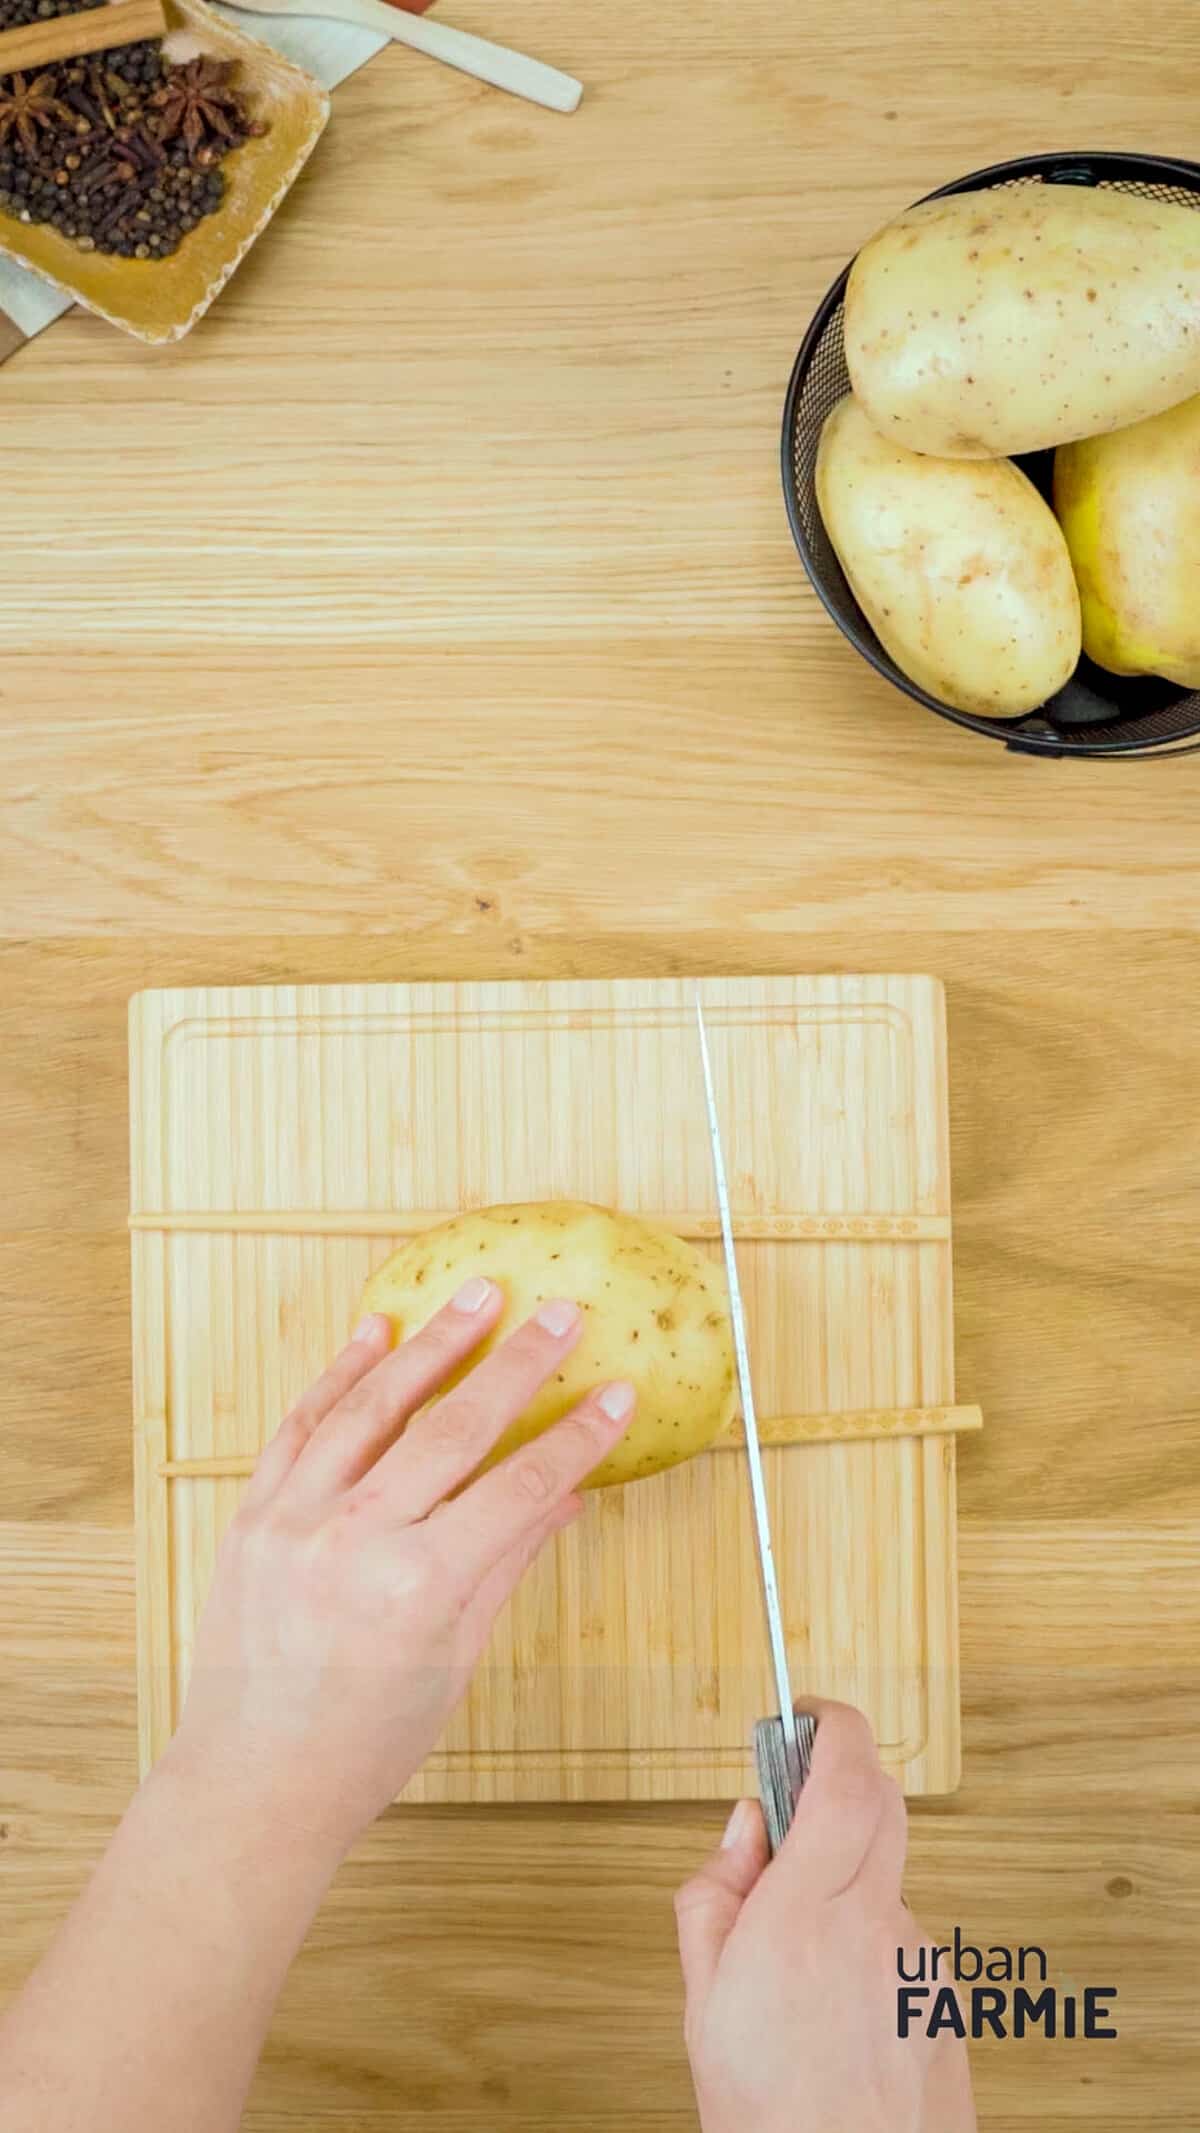 An image of a potato being slit on a chopping board.